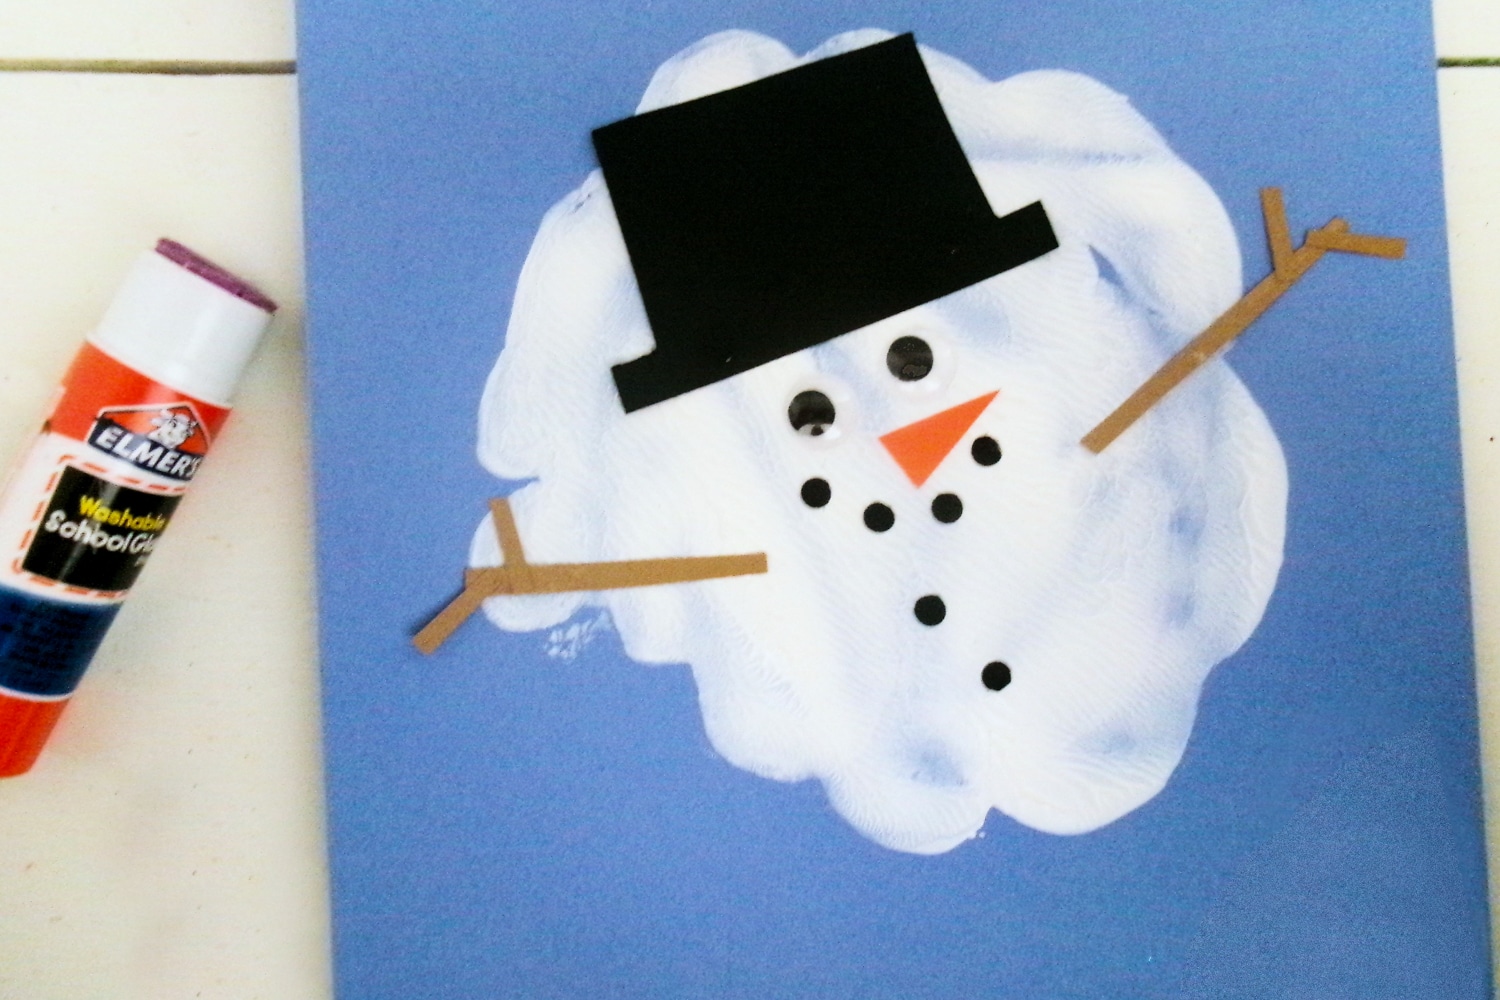 White paint splat with snowman hat, eyes, mouth, buttons and arms